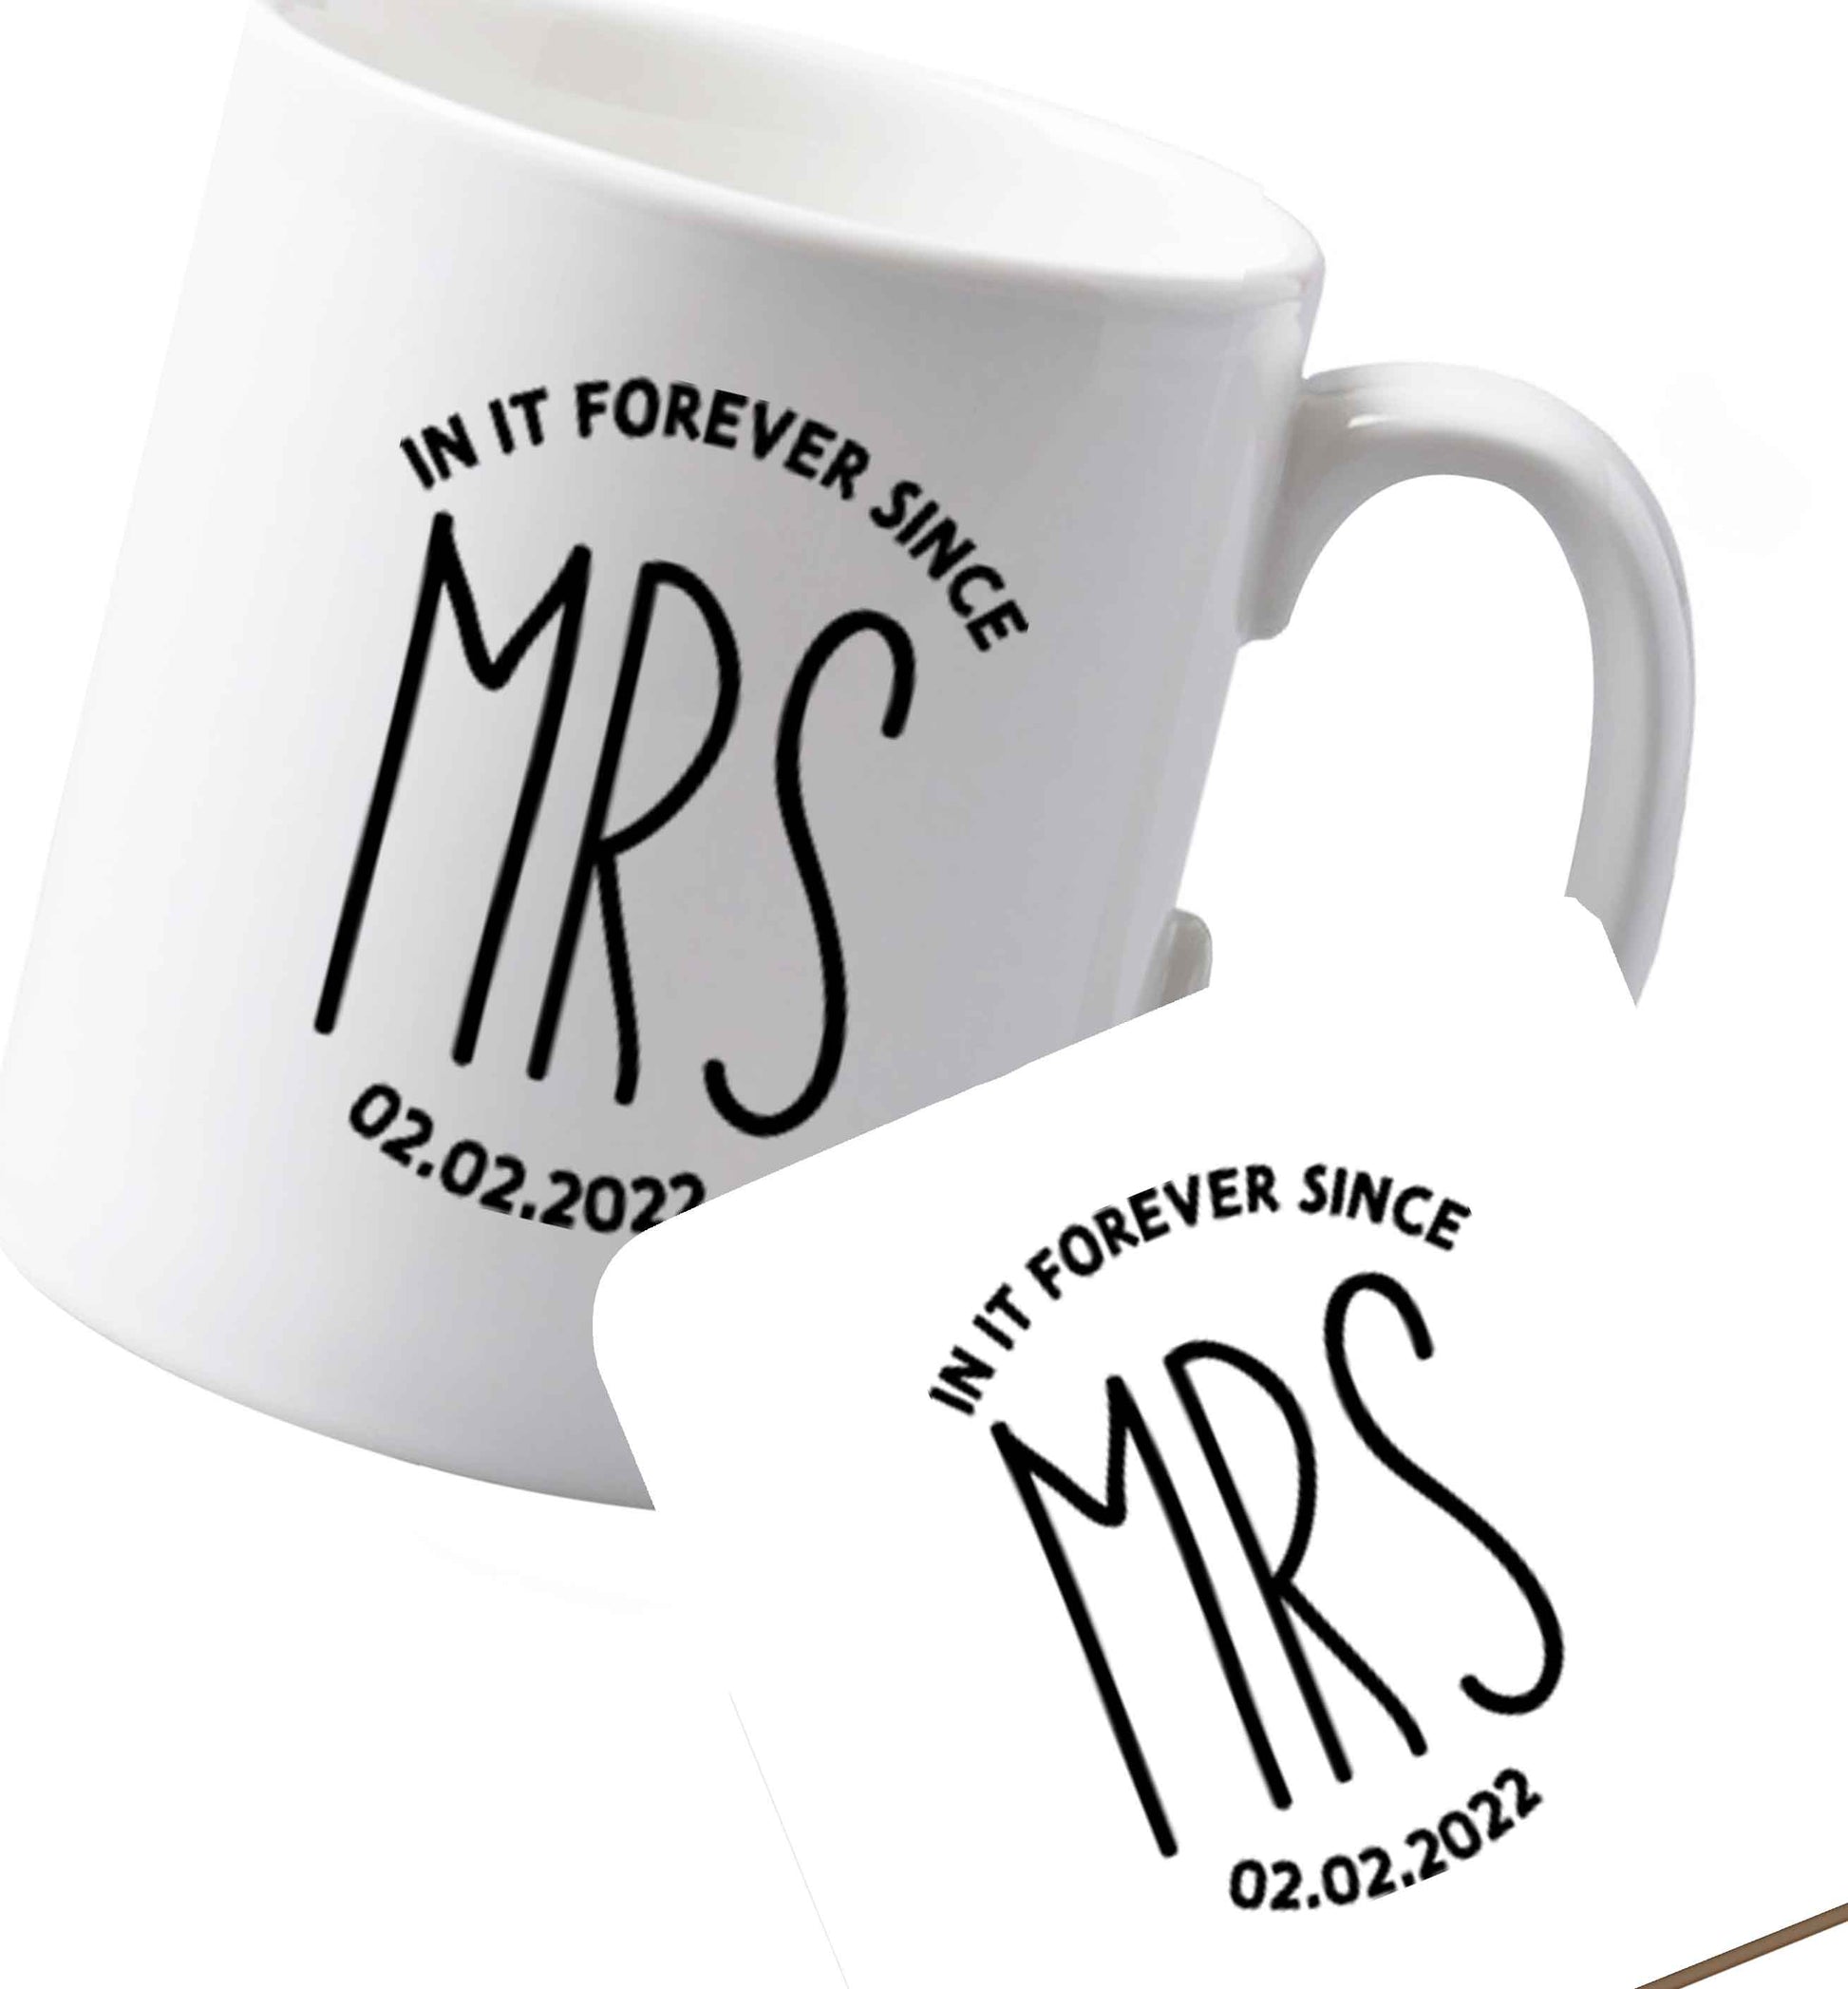 10 oz Ceramic mug and coaster Funny matching gifts for him and her! Get matchy matchy, ideal for newlywed couples or a little valentines gift!   both sides